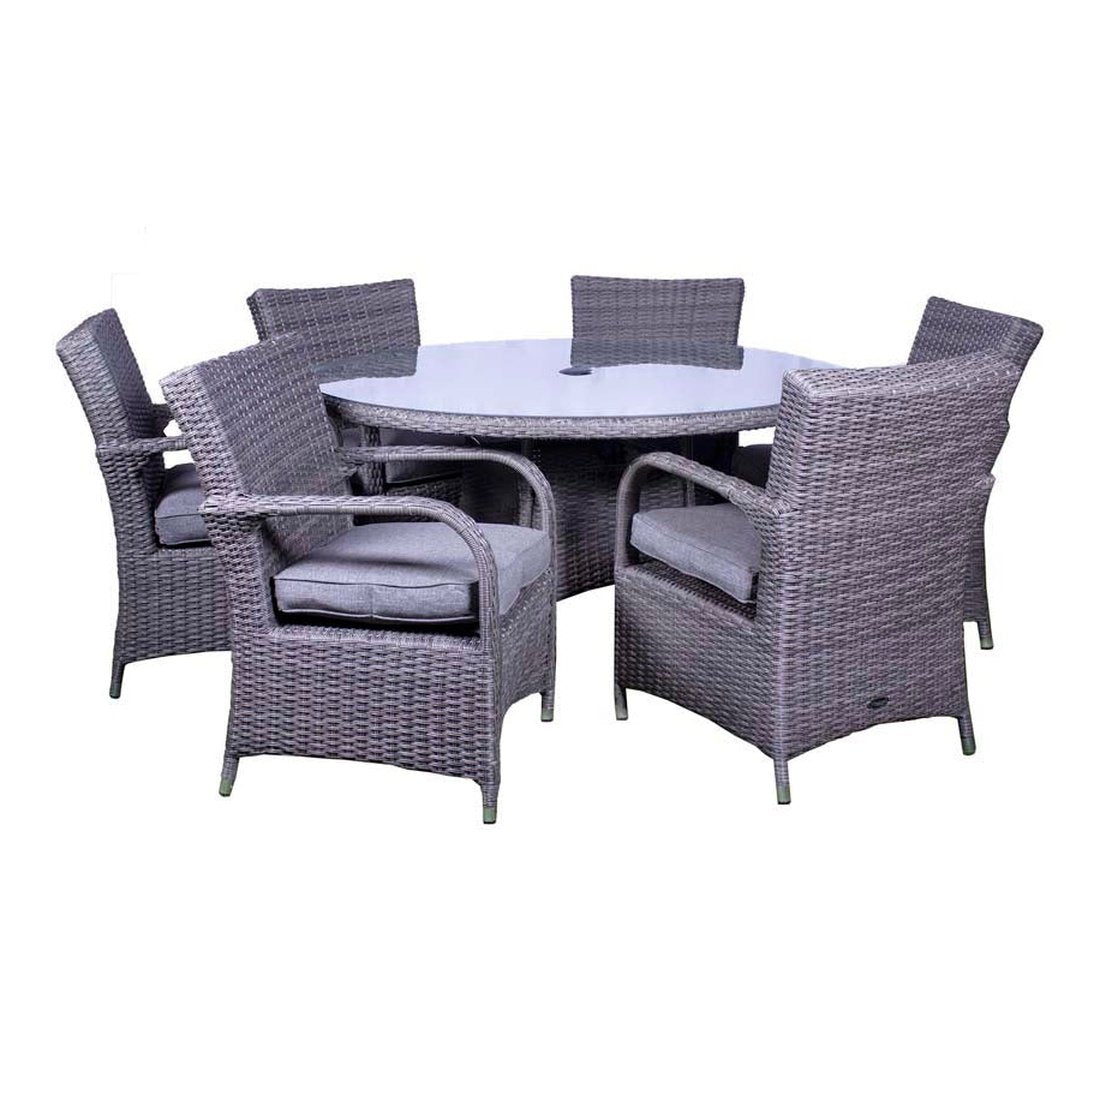 Olivia's 6 Seater Round Deluxe Outdoor Dining Set